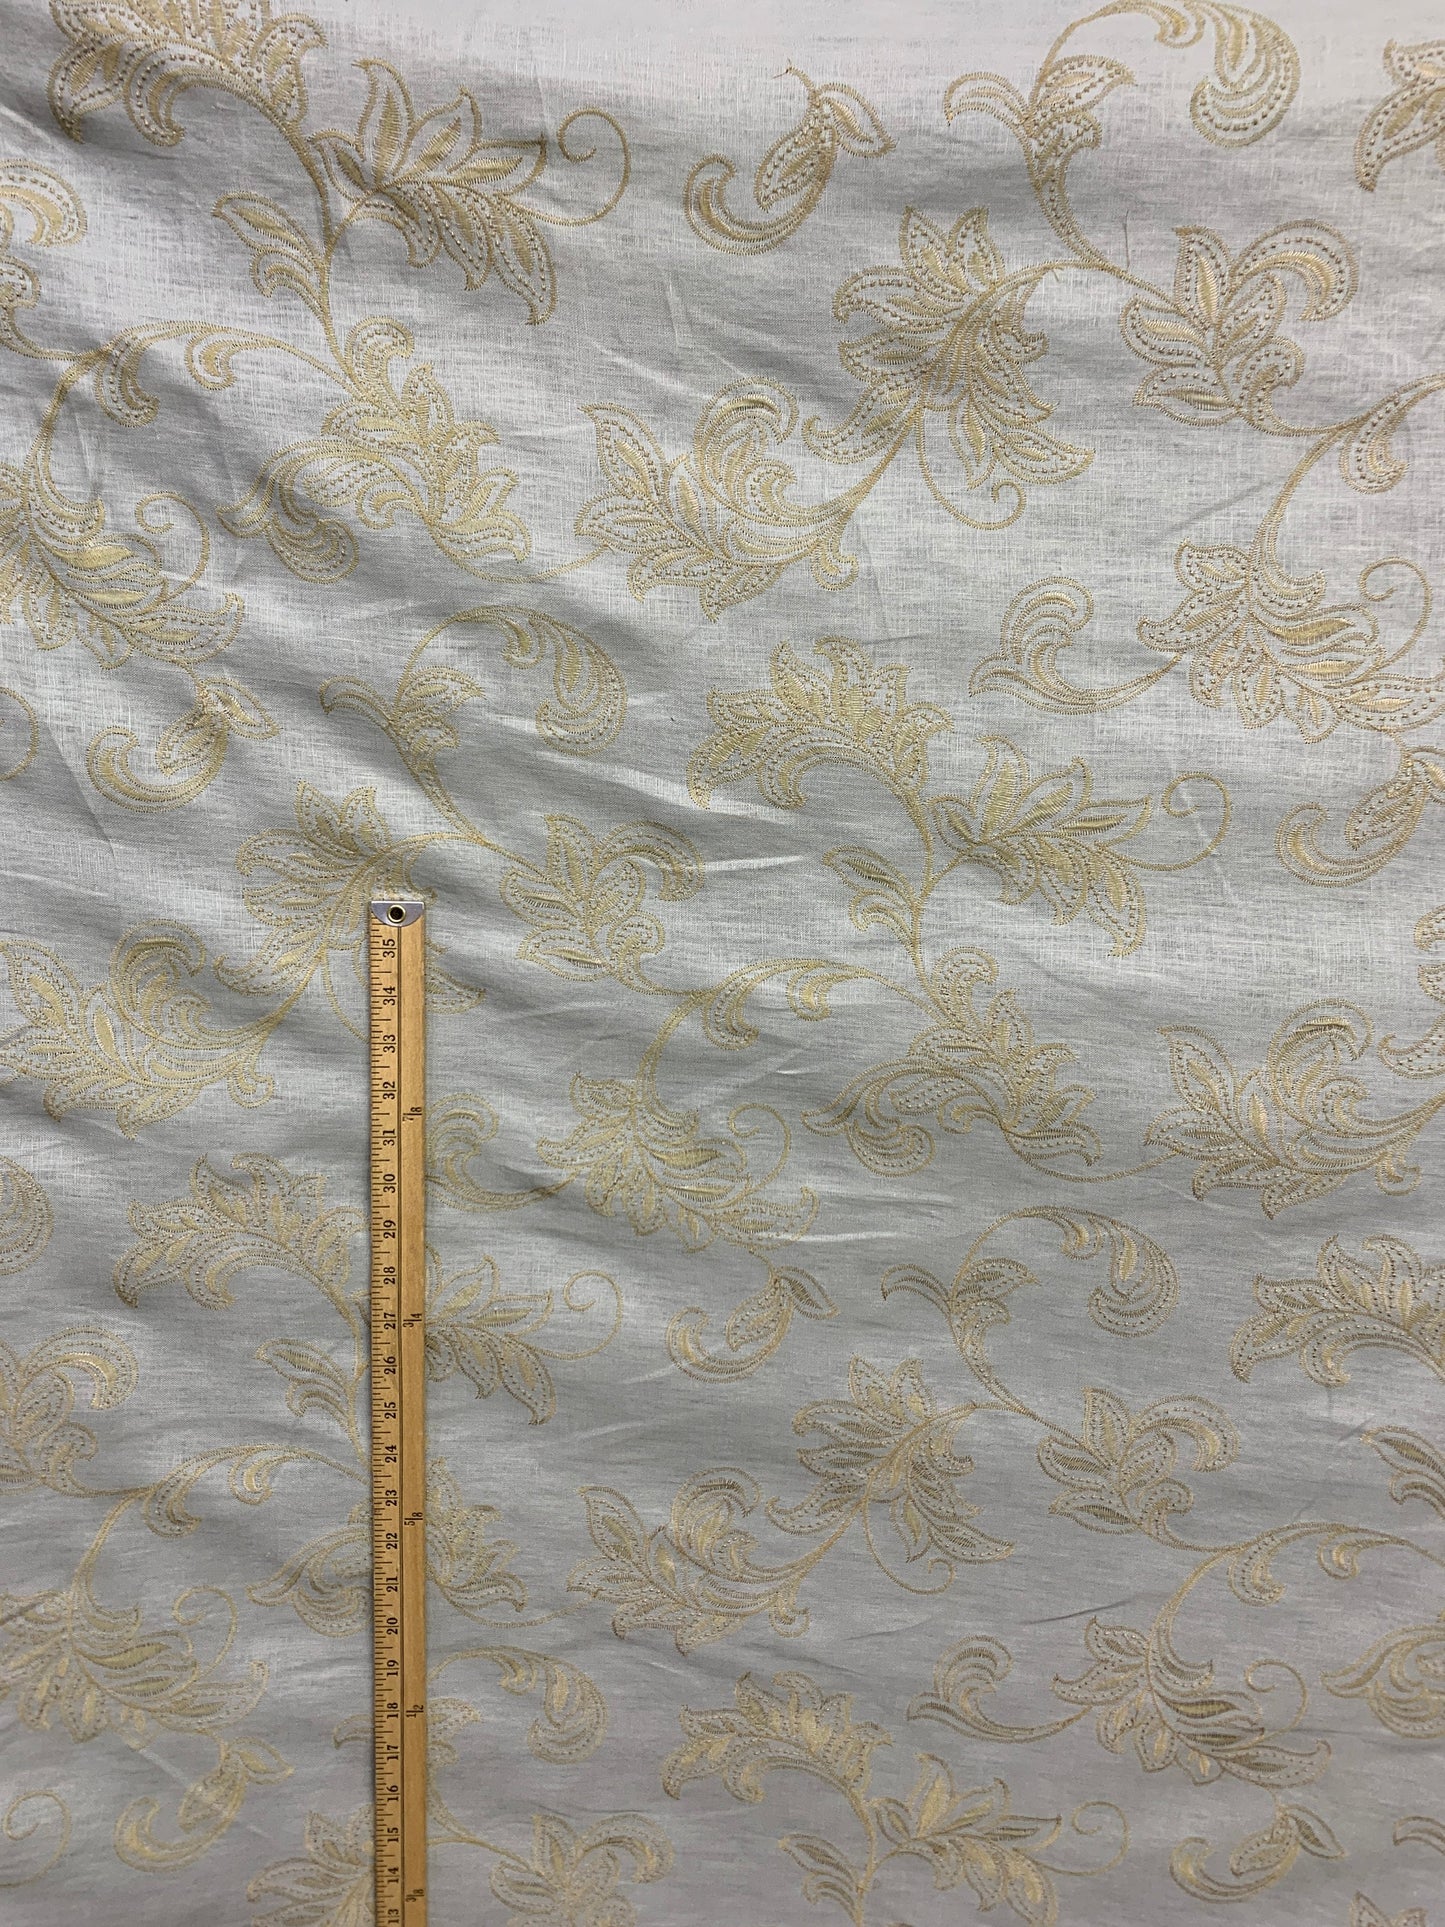 GRAY BEIGE Floral Embroidered 100% Linen Fabric (54 in.) Sold By The Yard